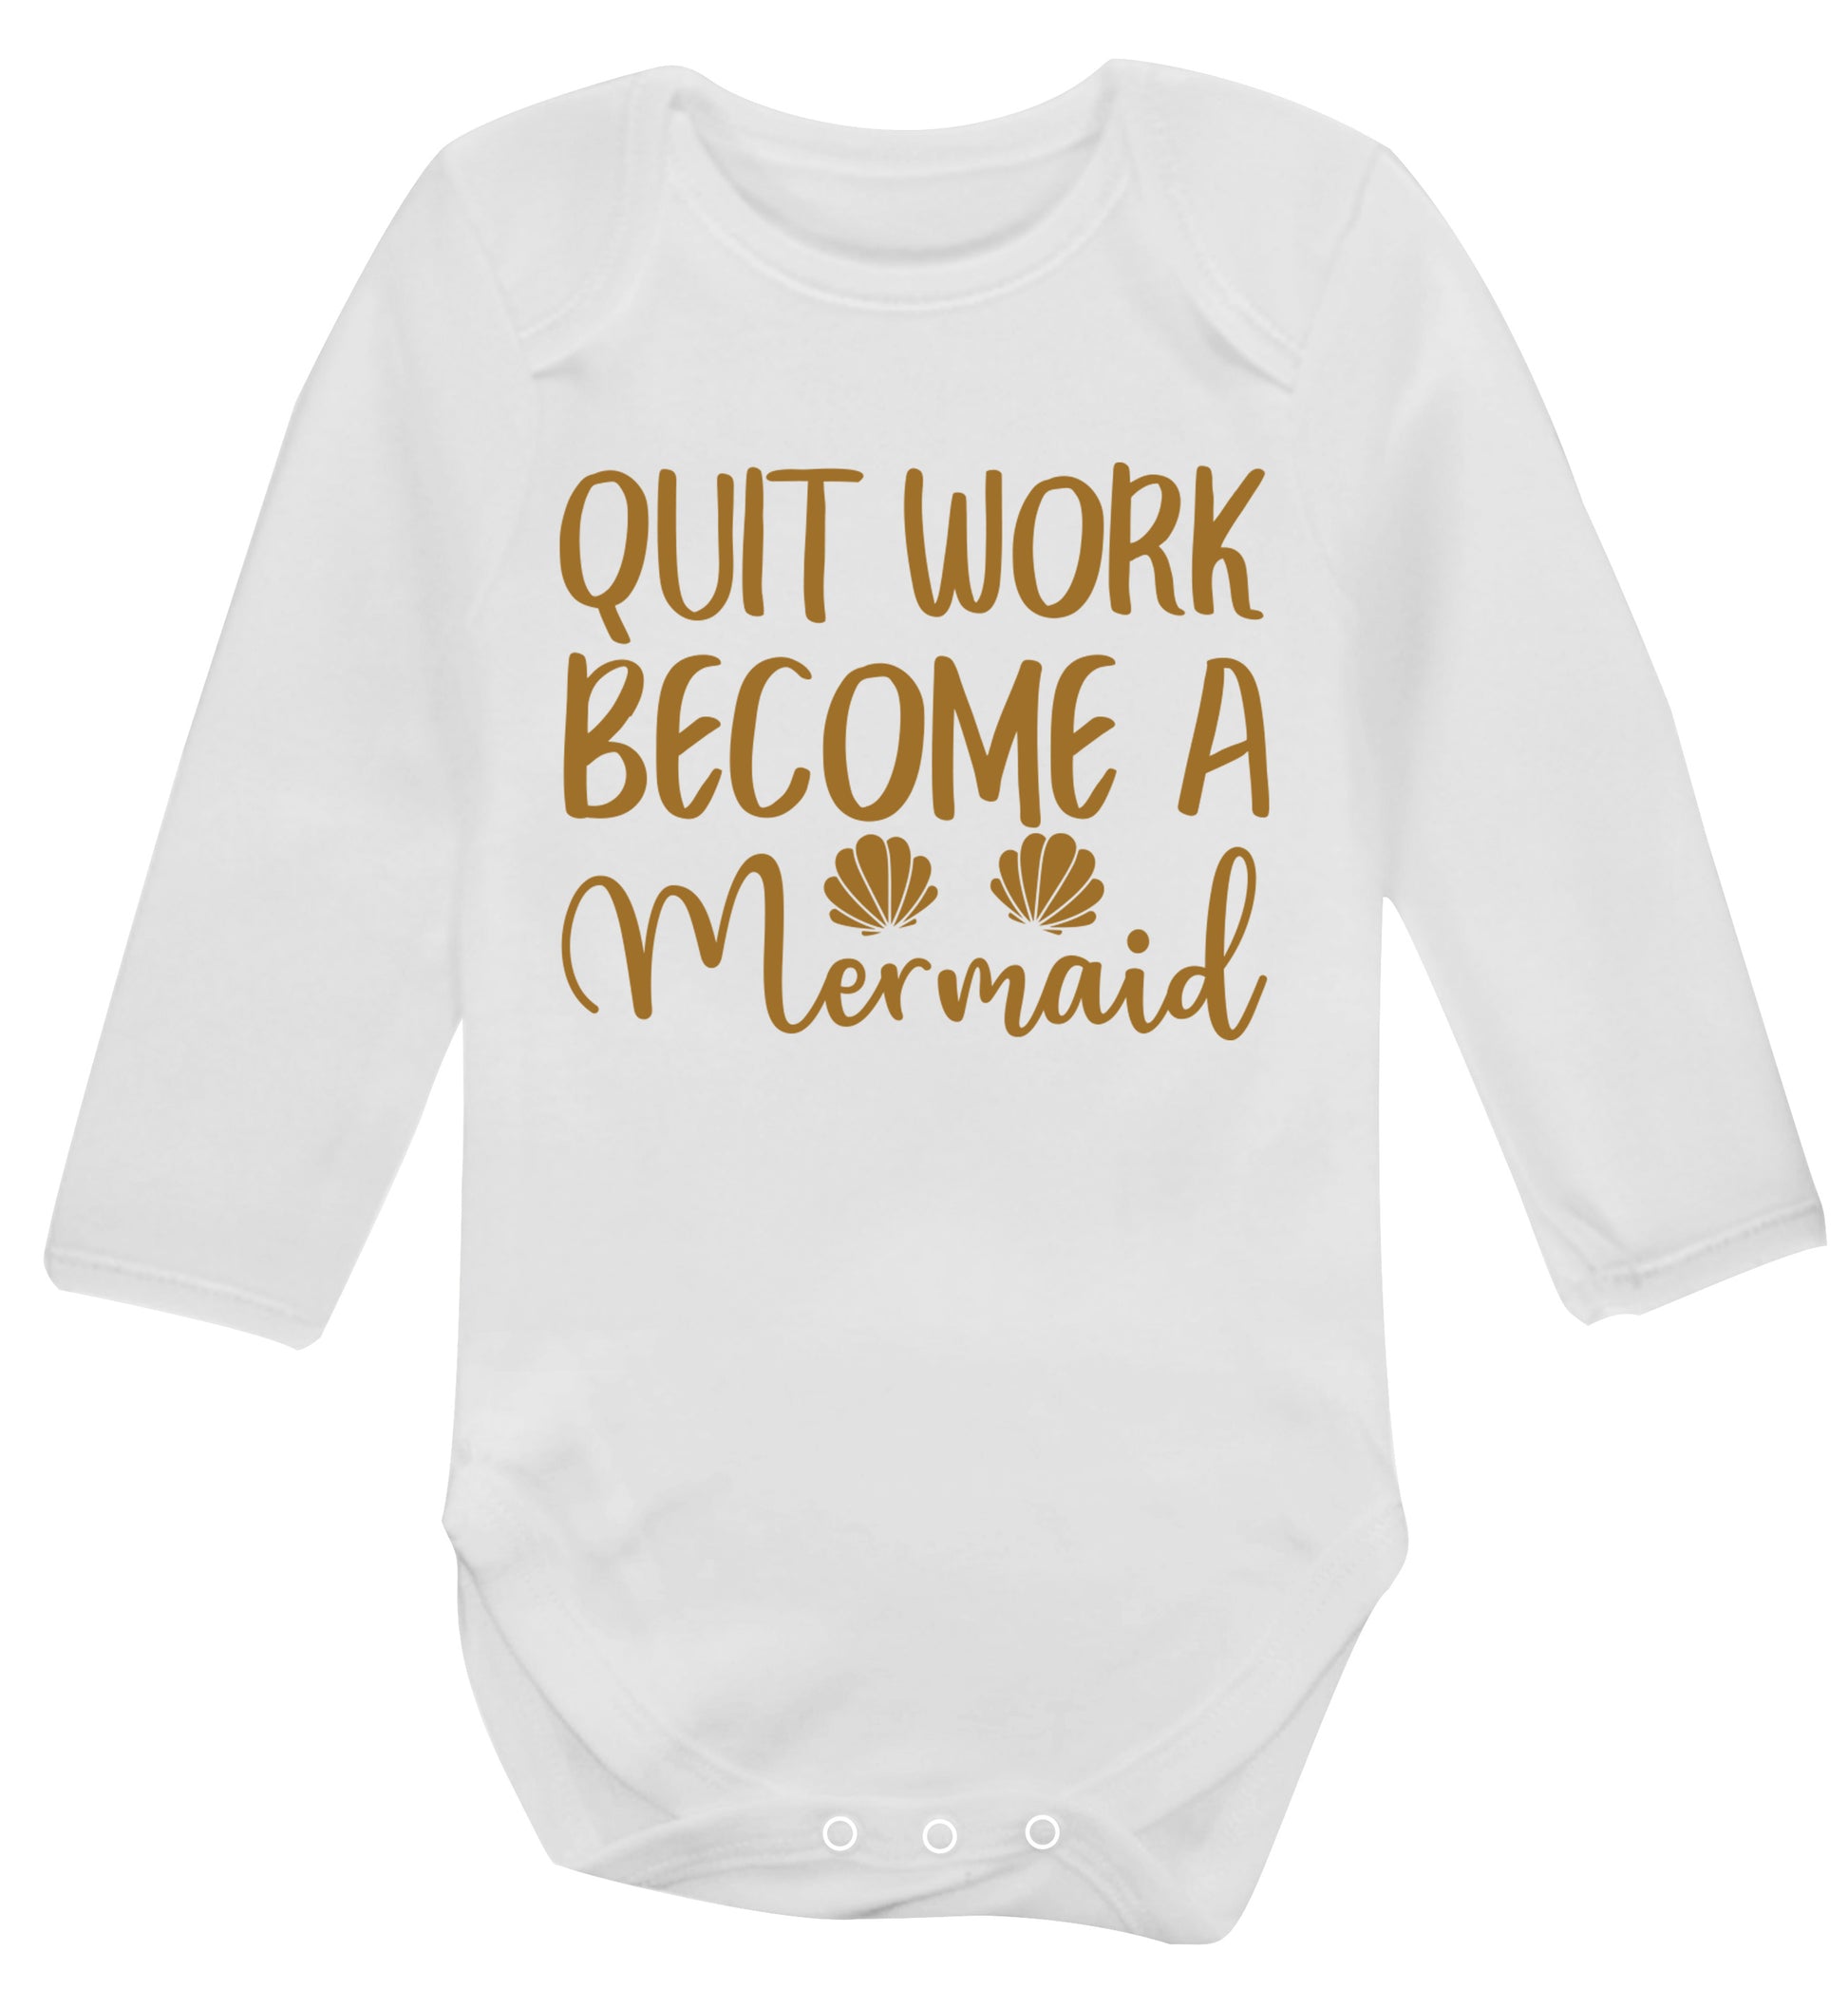 Quit work become a mermaid Baby Vest long sleeved white 6-12 months